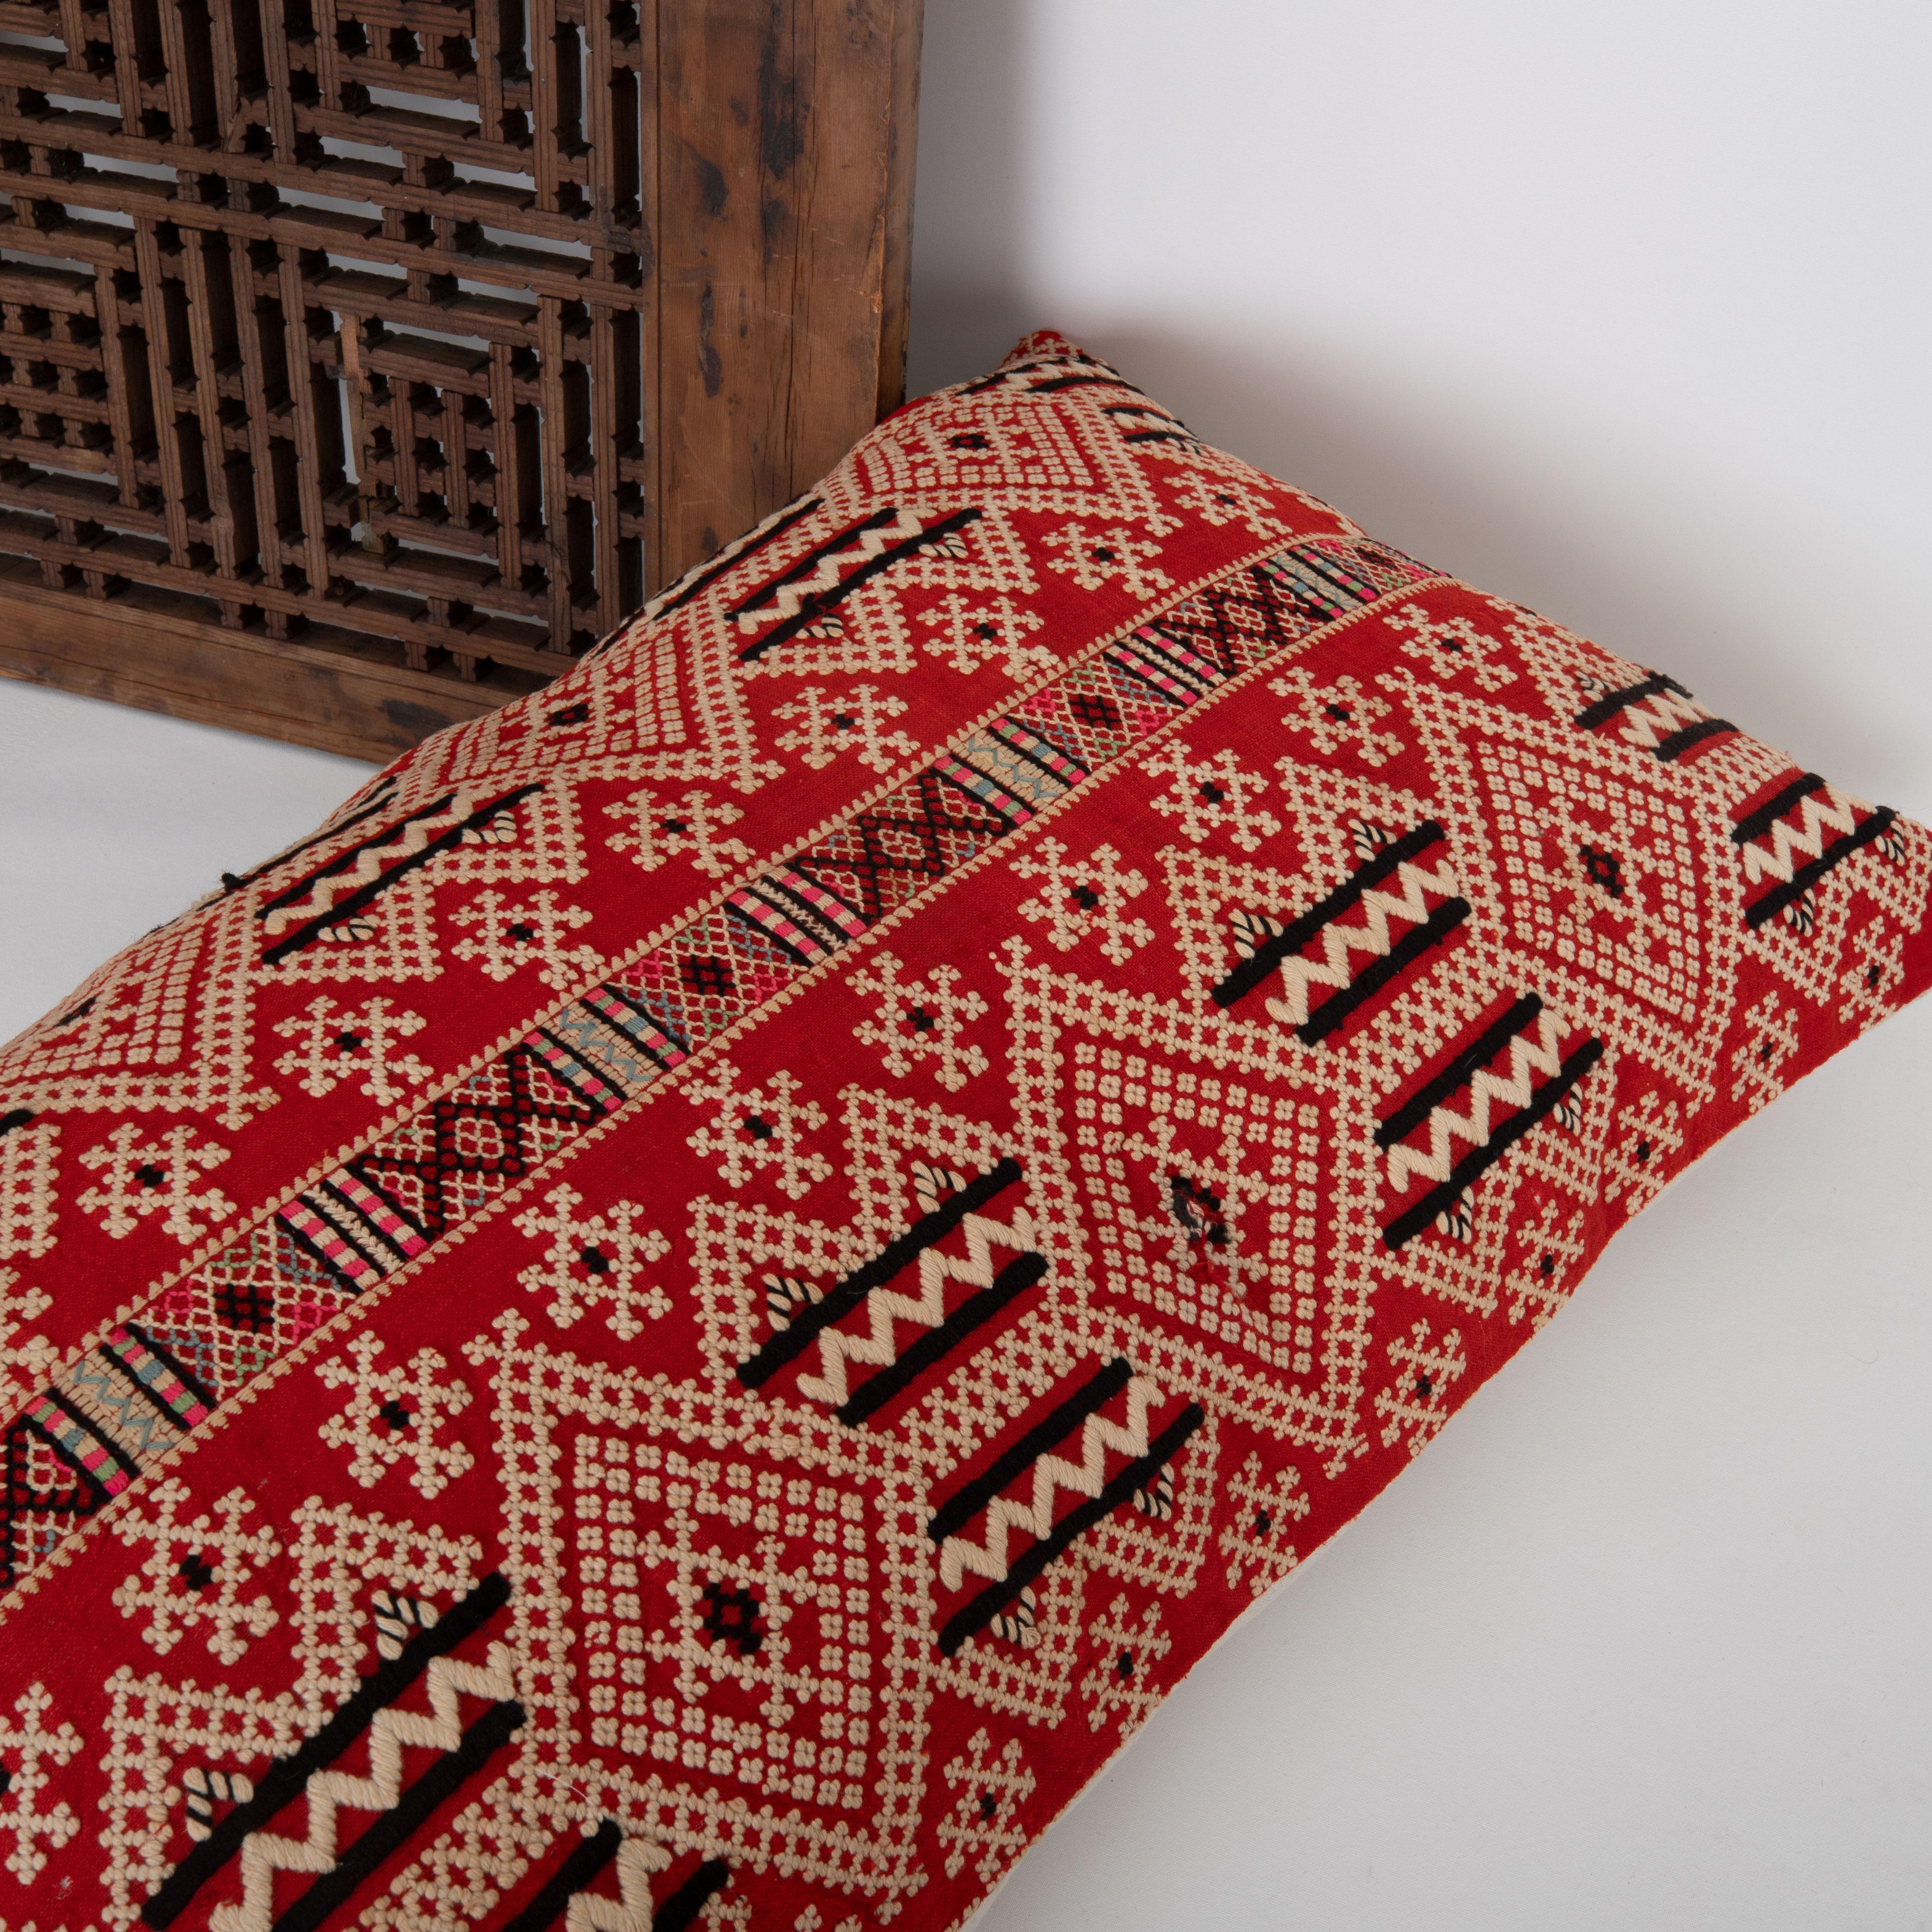 20th Century Pillow Case Made From an Mid 20th C Eastern European Apron For Sale